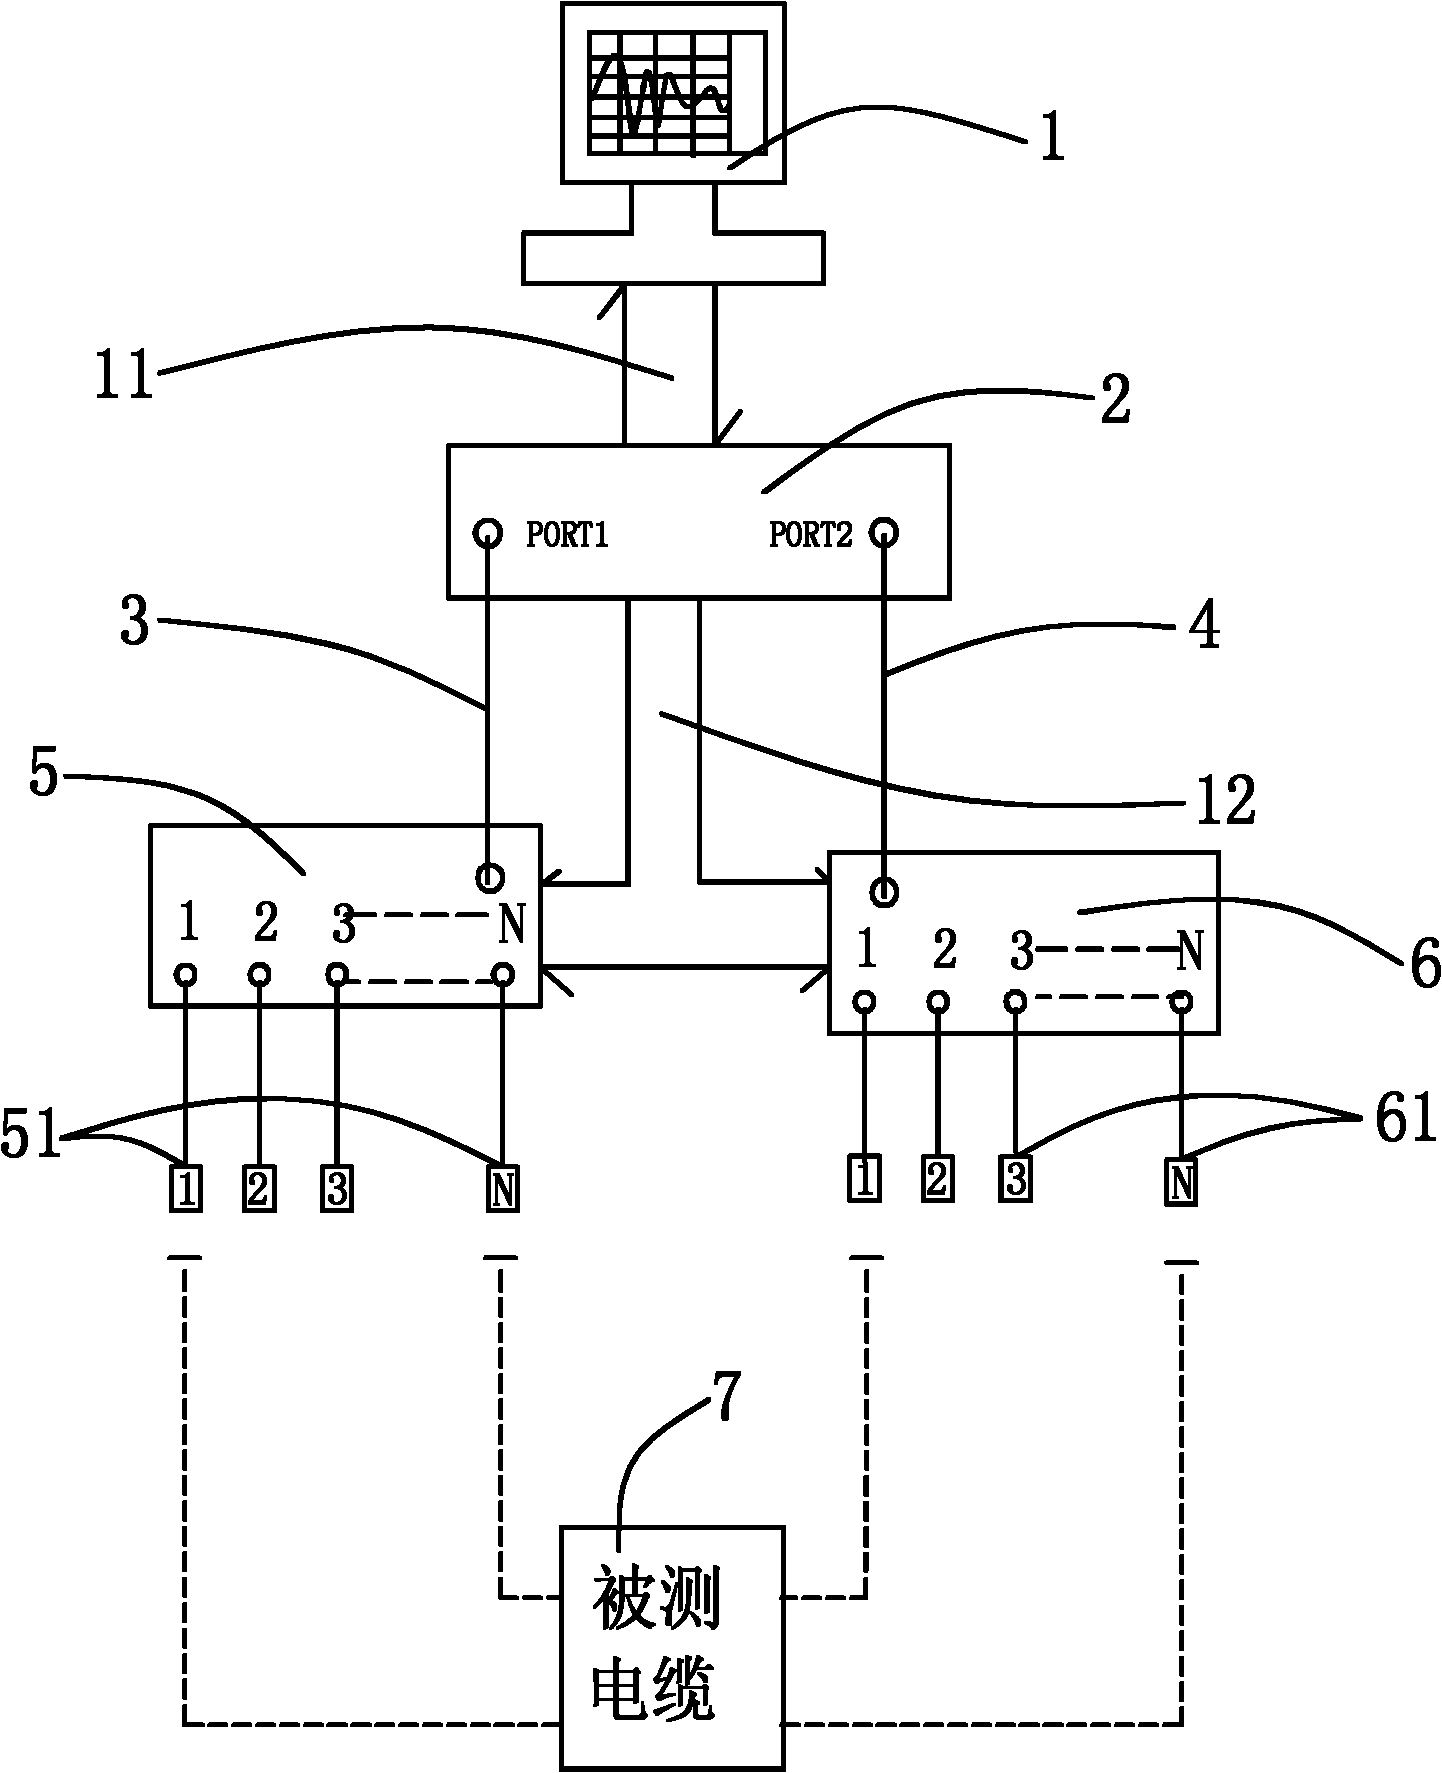 Method and system for testing swinging cross or breaking of multi-core cable